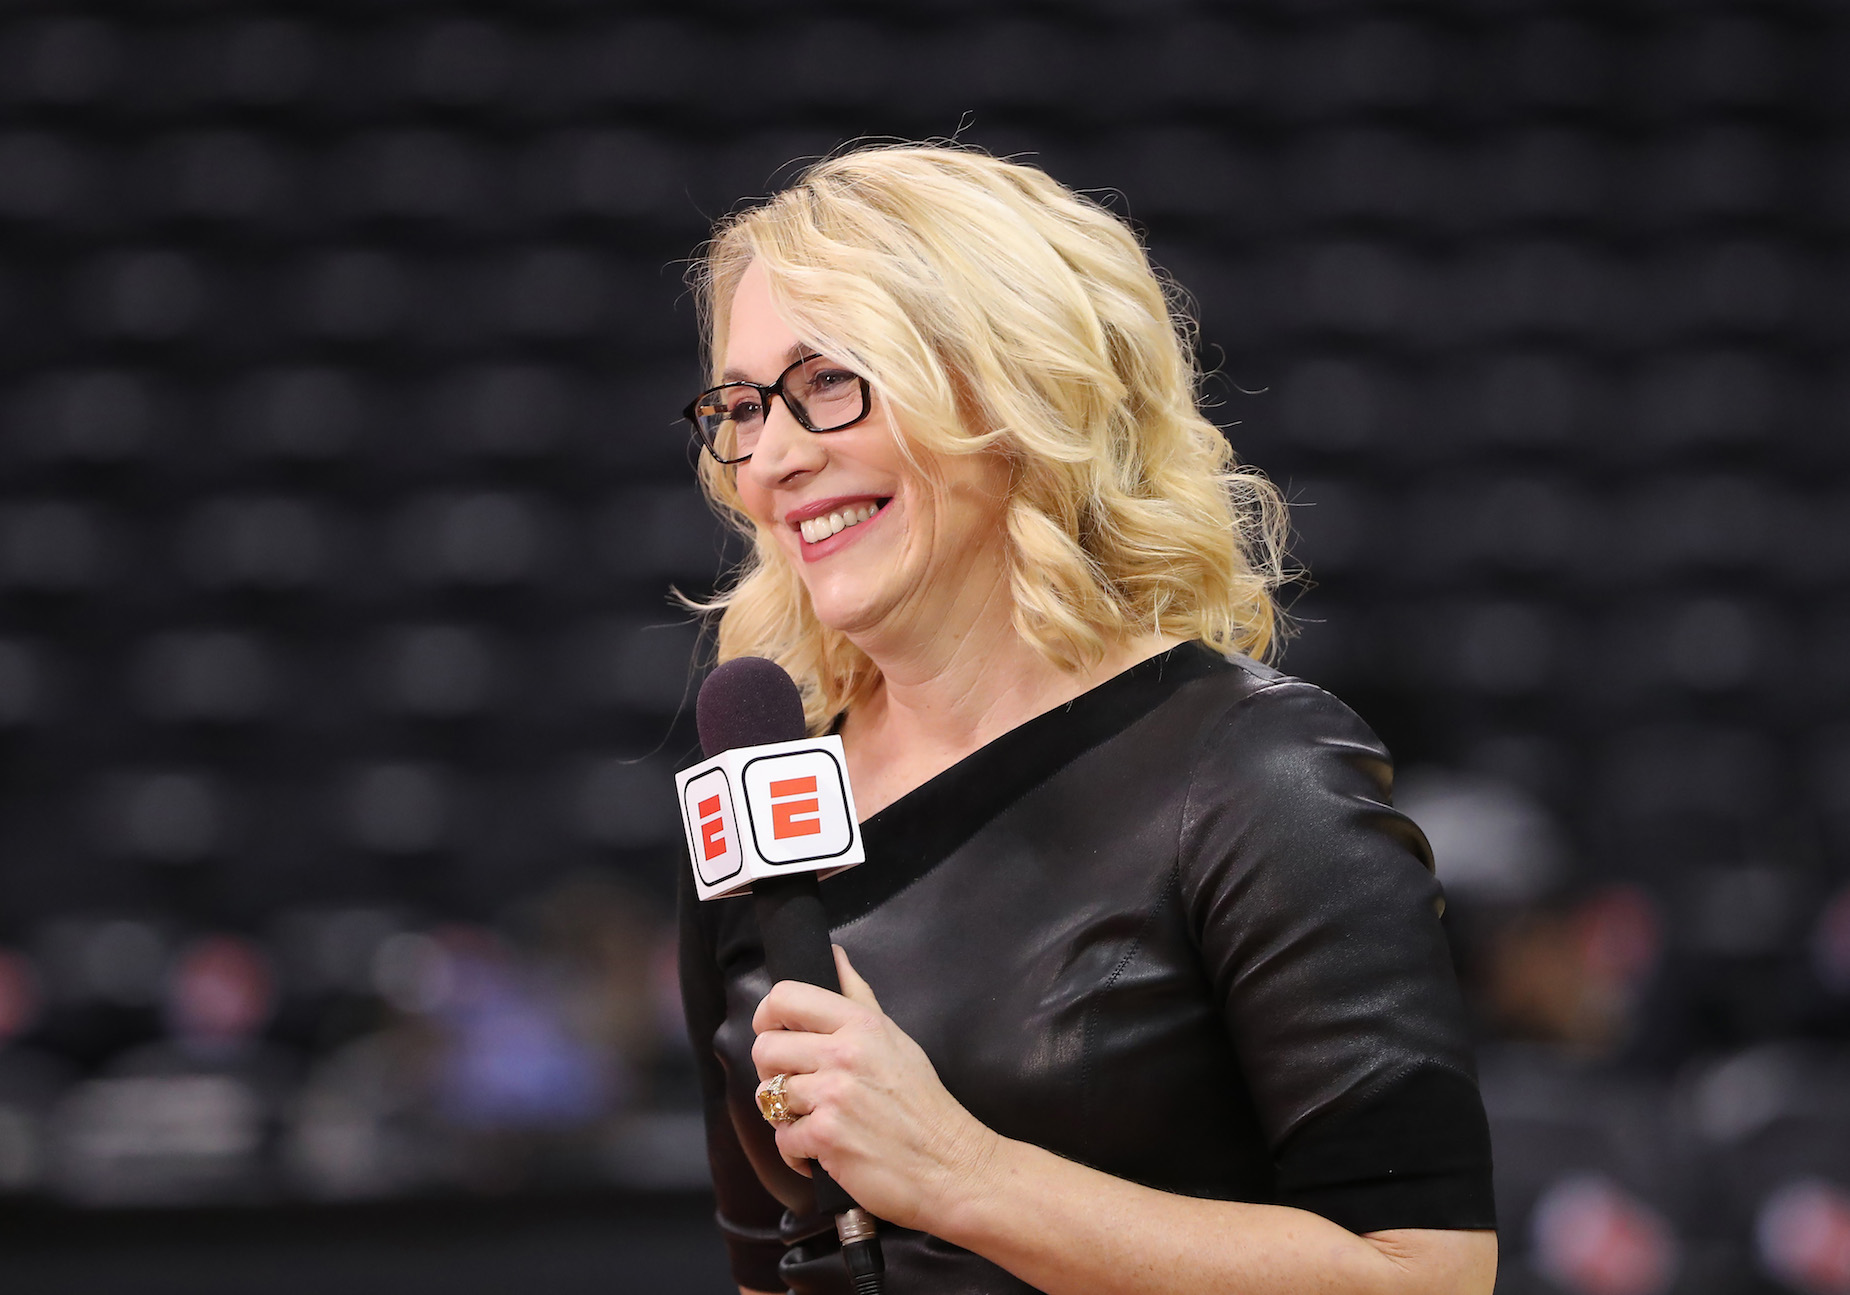 ESPN's Doris Burke was a talented basketball player before becoming a beloved broadcaster.